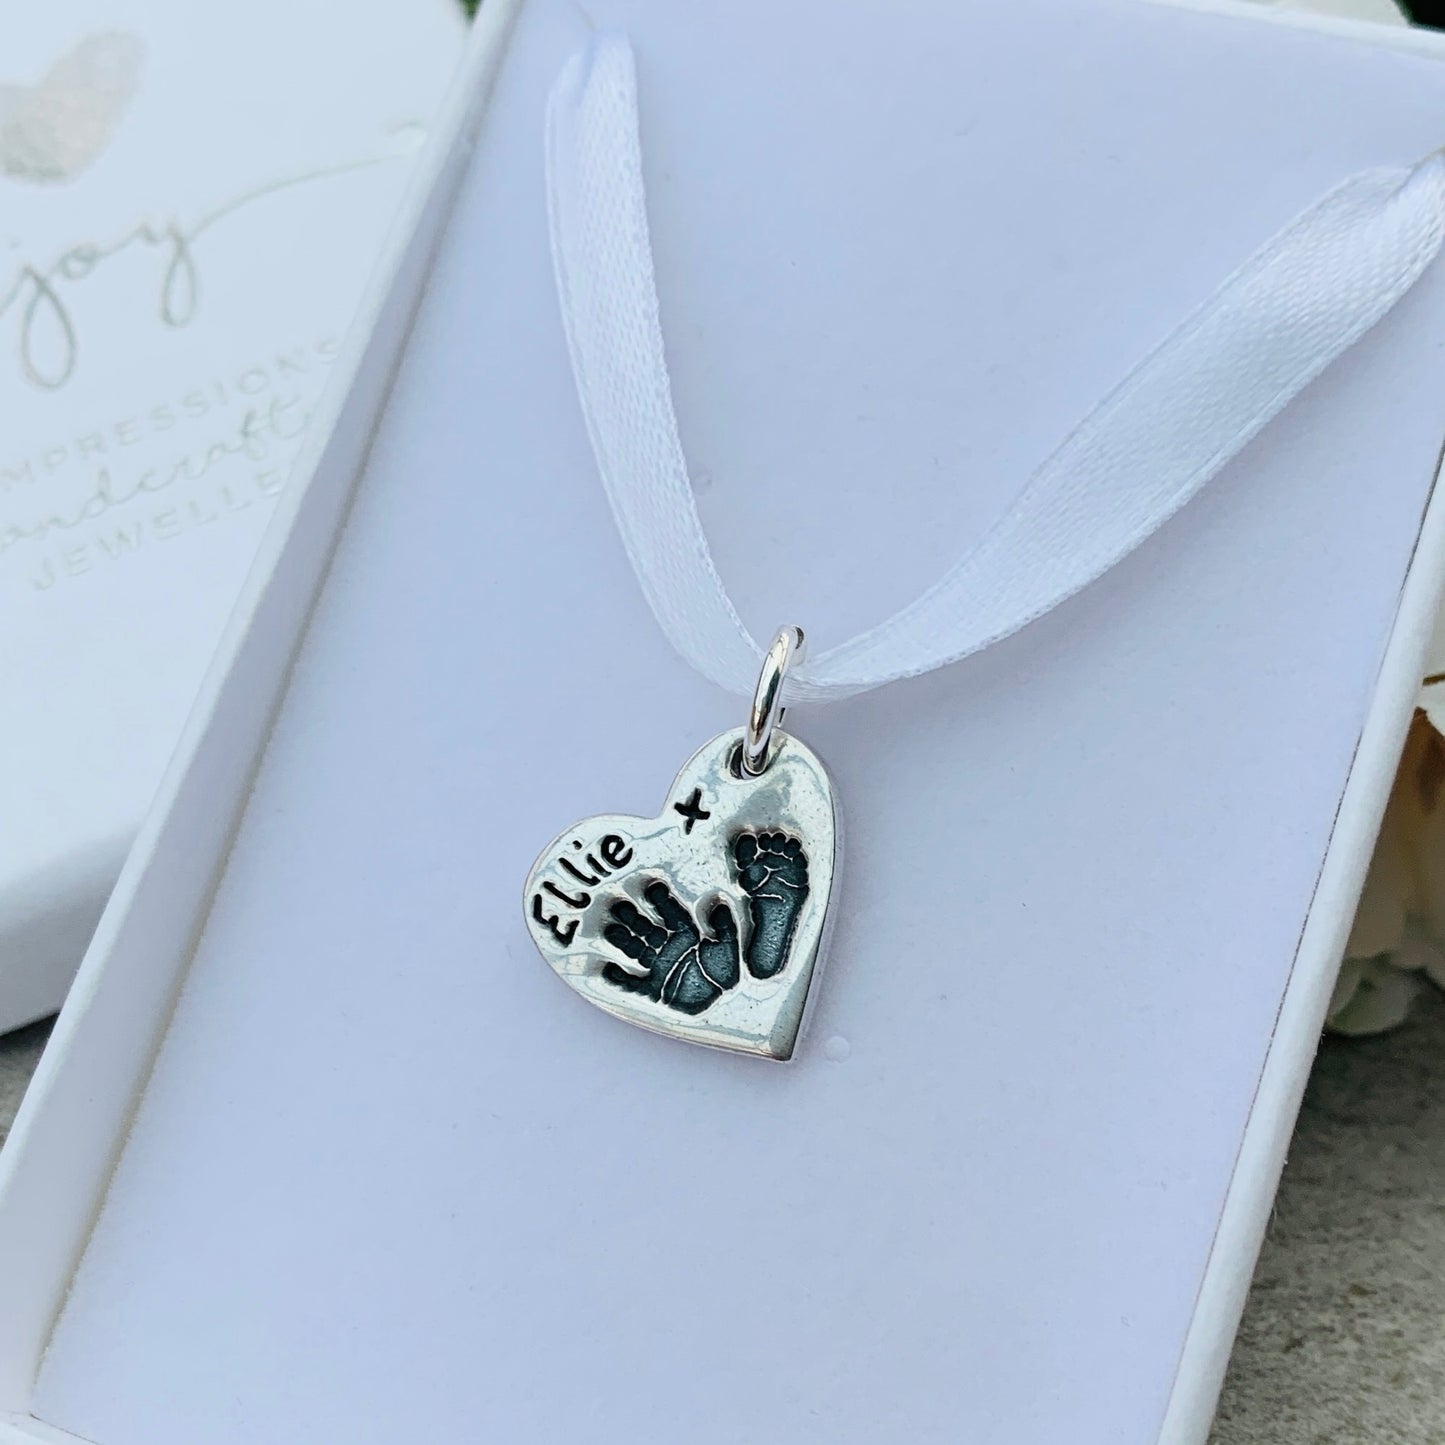 Hand and Footprint Sterling Silver Charm by Joy Impressions presented in jewellery box